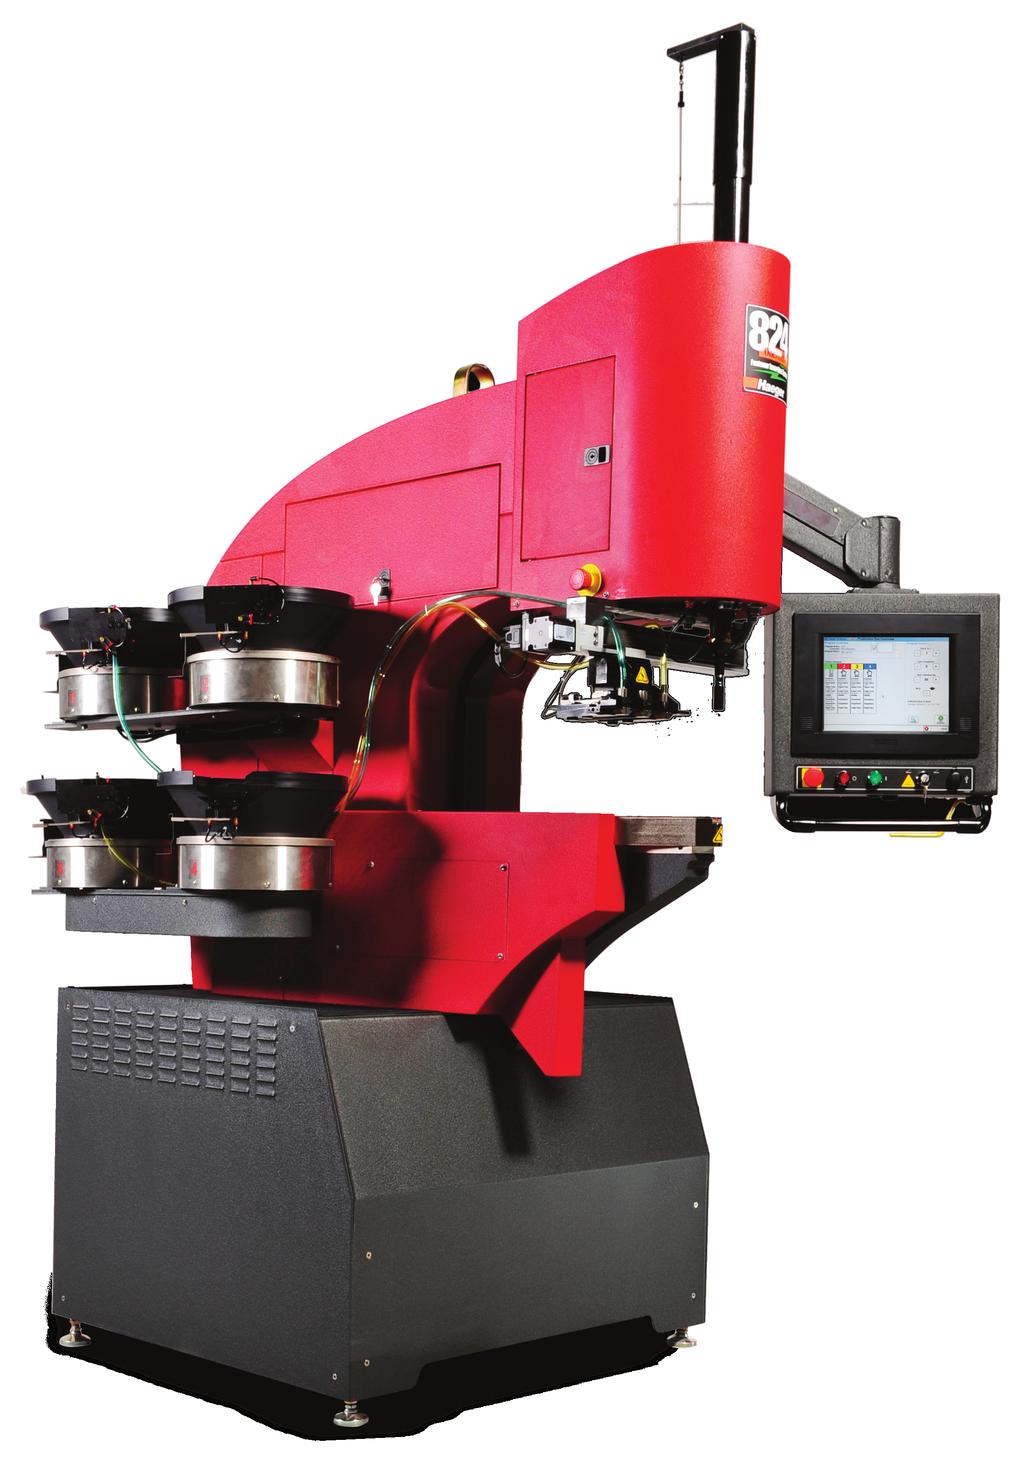 FASTENER INSERTION EQUIPMENT 824 OneTouch 4 Fastener Insertion System Combine Maximum Productivity and Process Control with Ease of Setup 4 Station Automatic Lower Tool Changer An integrated